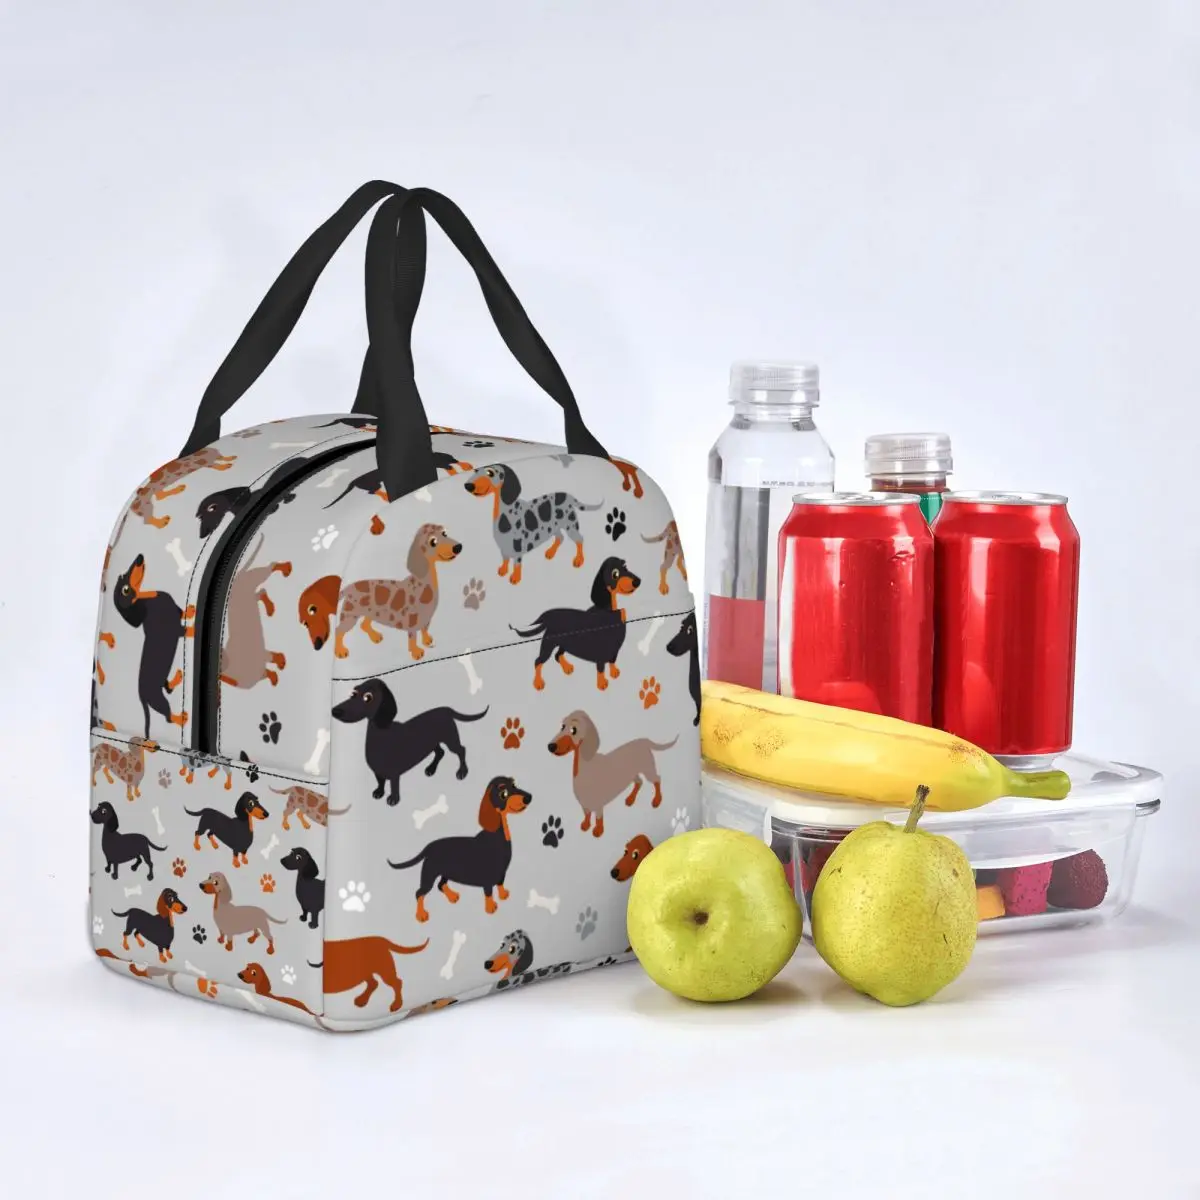 Lunch Bags for Men Women Dachshund Paws And Bones Insulated Cooler Bag Waterproof Picnic Animal Oxford Lunch Box Handbags